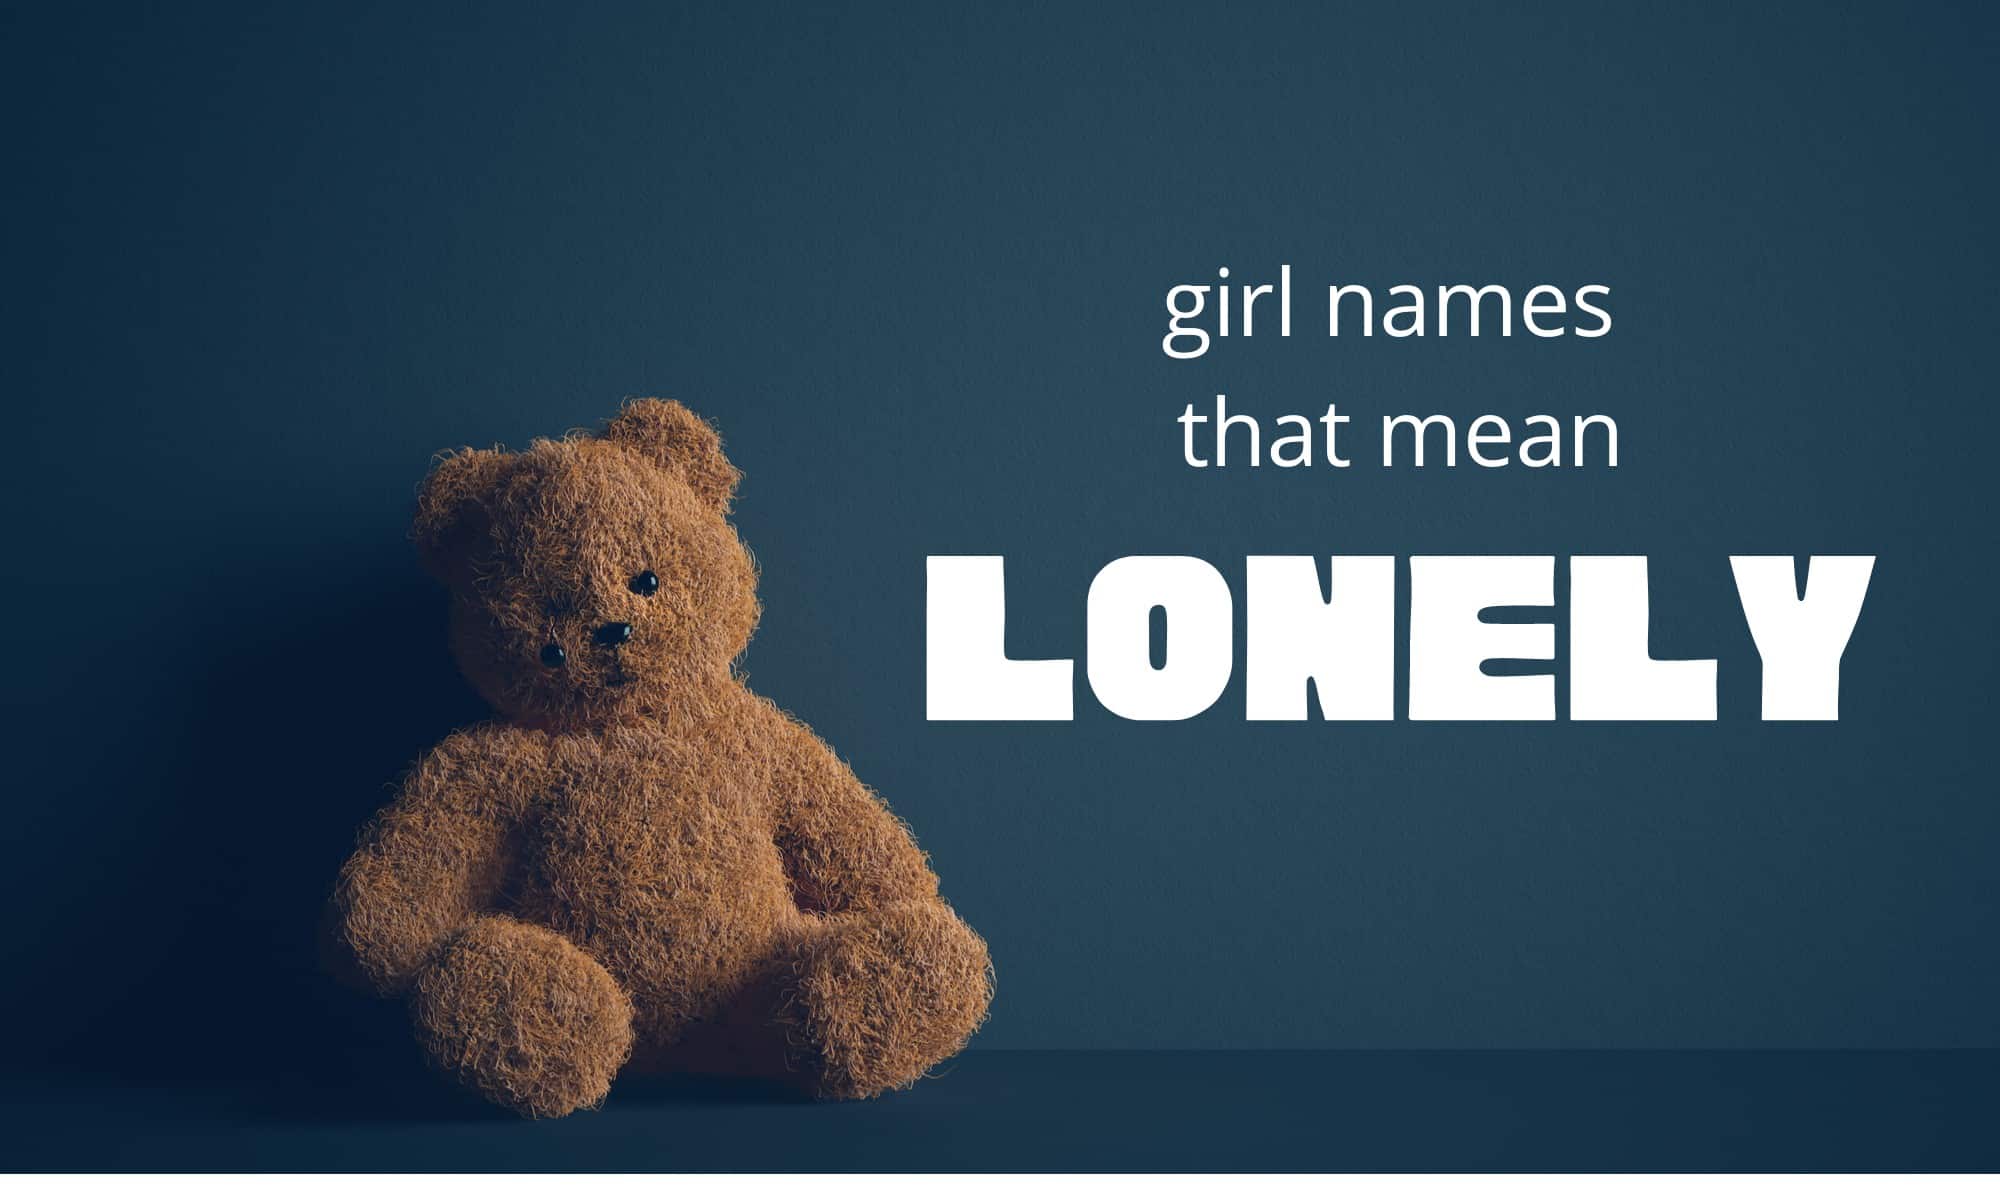 girl names that mean lonely